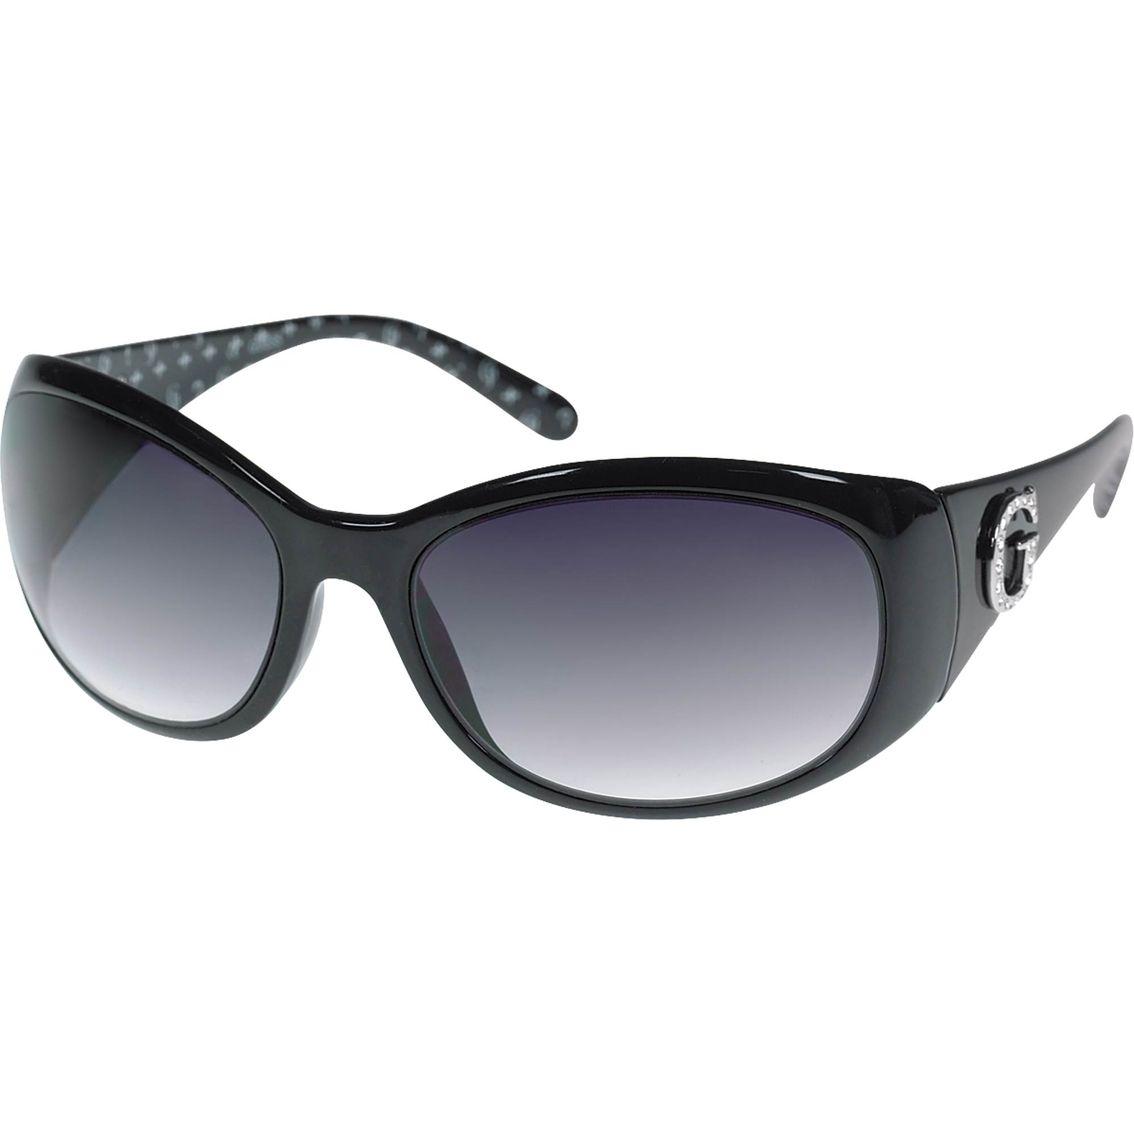 Guess G Logo - Guess Oval Frame Sunglasses With Guess G Logo | Women's Sunglasses ...